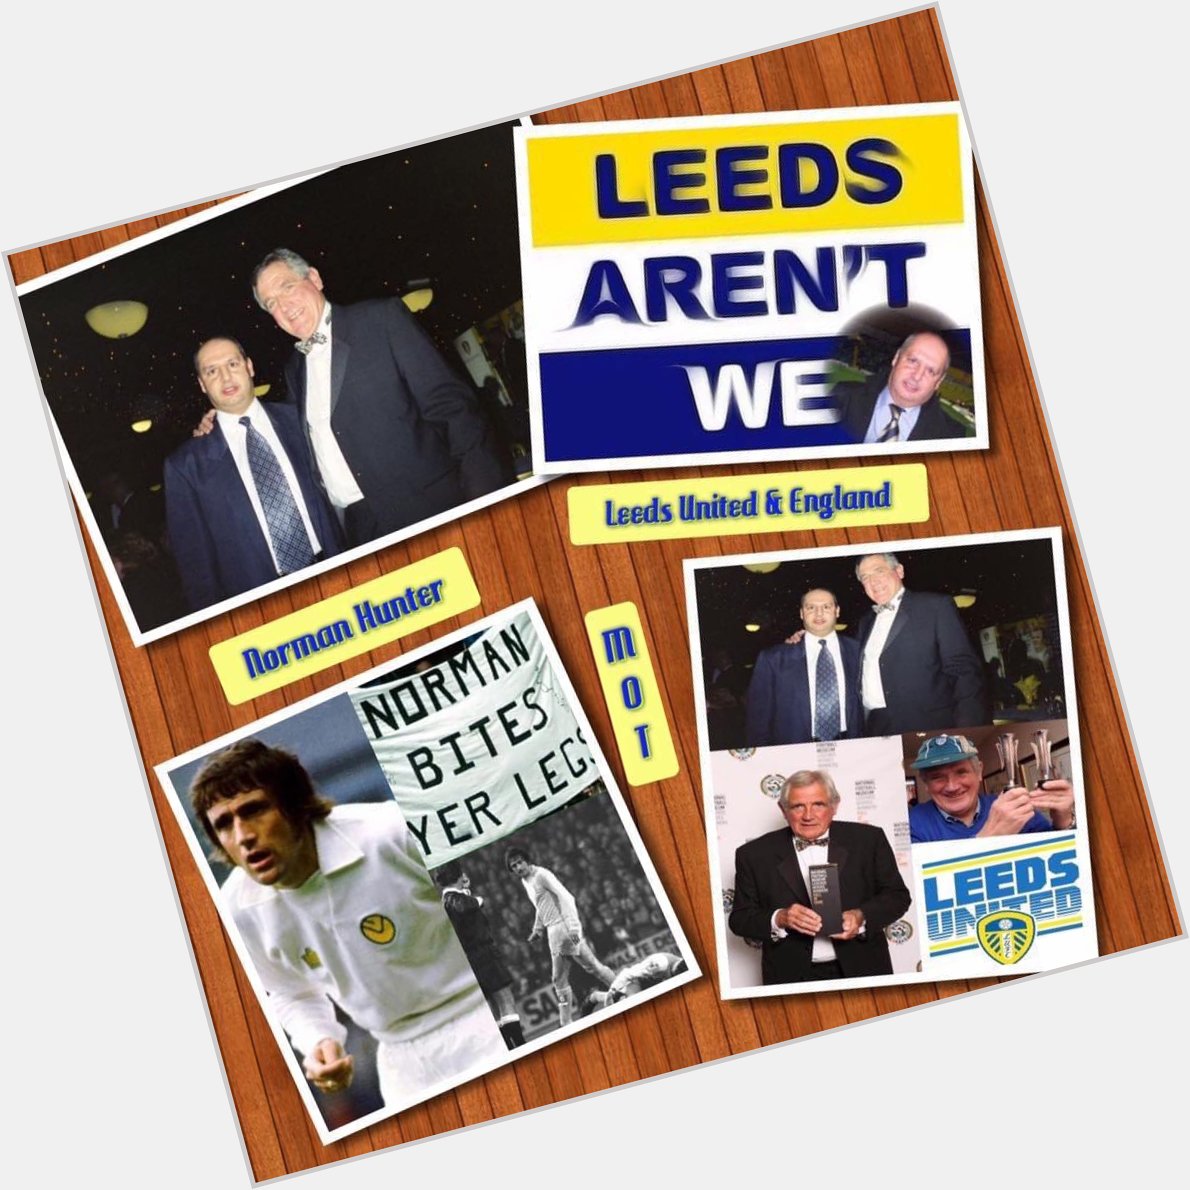 NORMAN HUNTER  :  A very Happy 75th. Heavenly Birthday today to a great friend and Leeds United Legend MOT. 